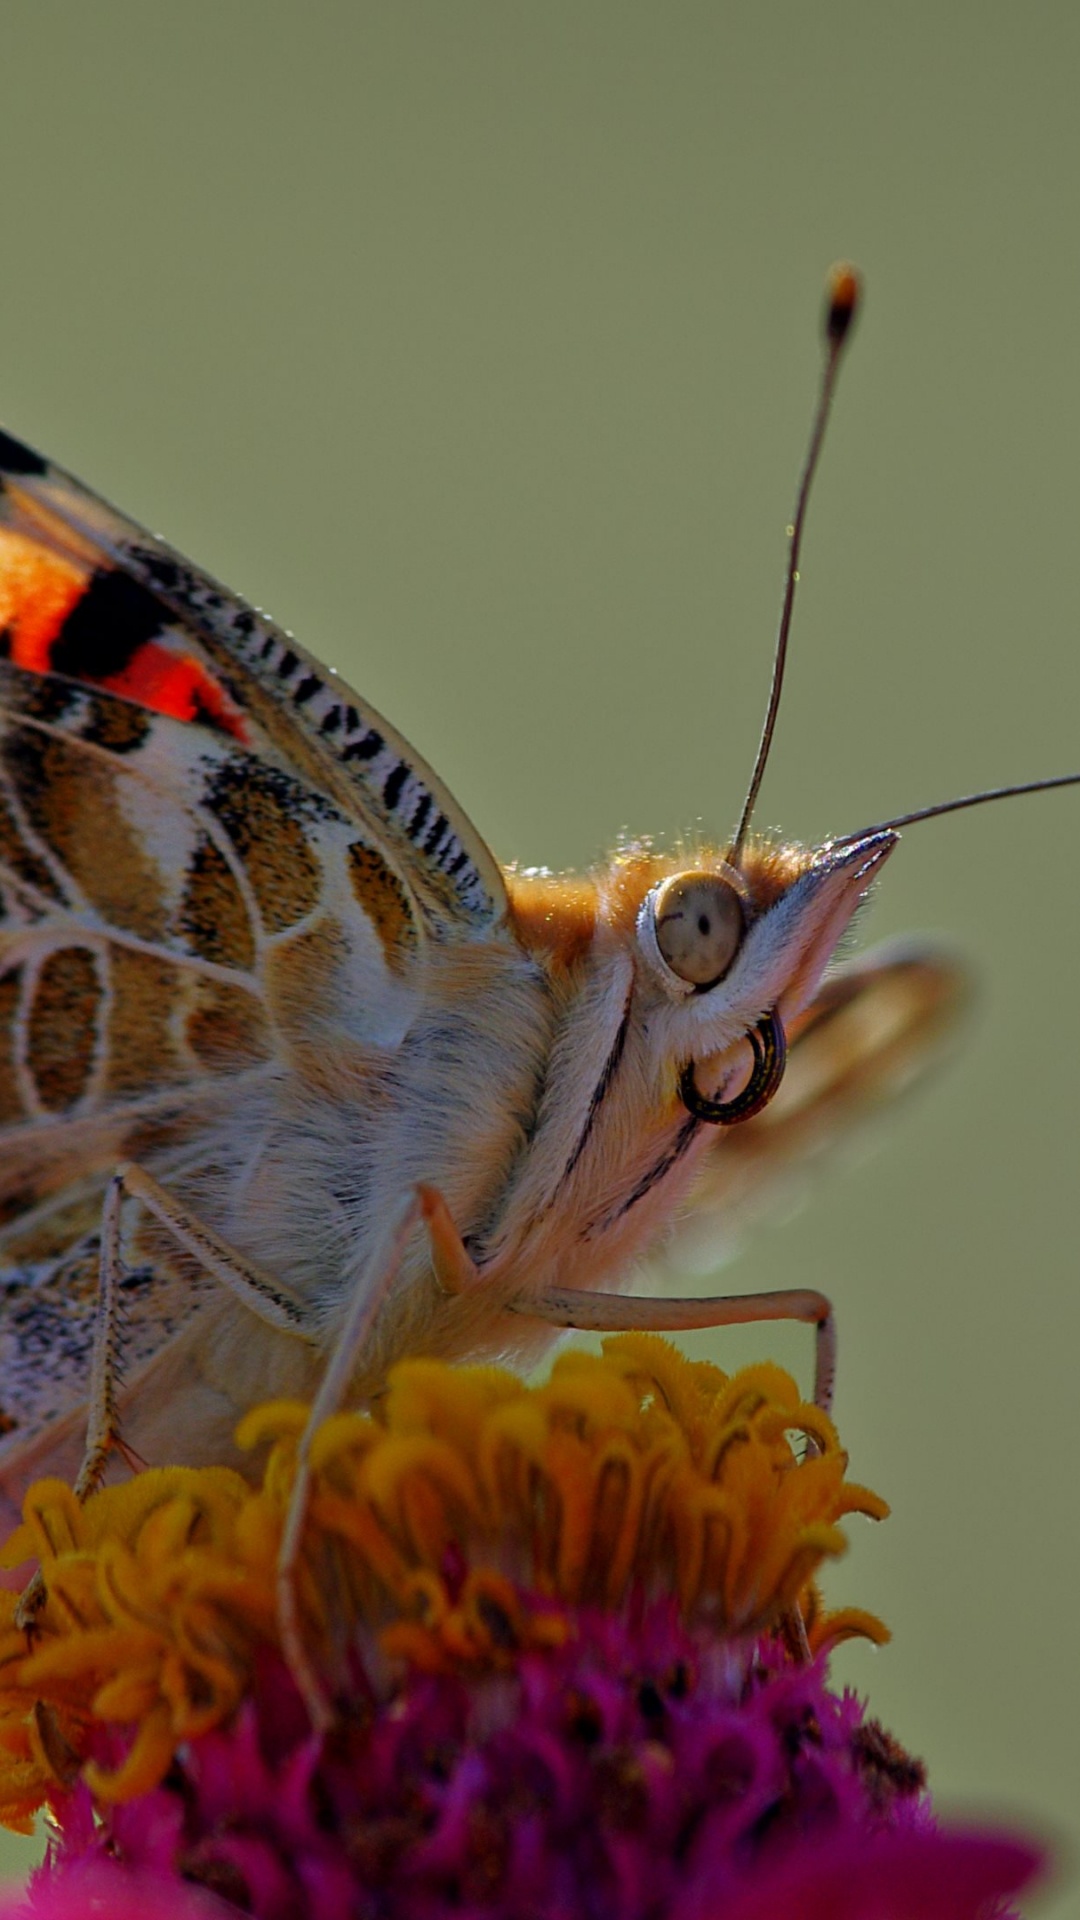 Painted Lady Butterfly Perched on Purple Flower in Close up Photography During Daytime. Wallpaper in 1080x1920 Resolution